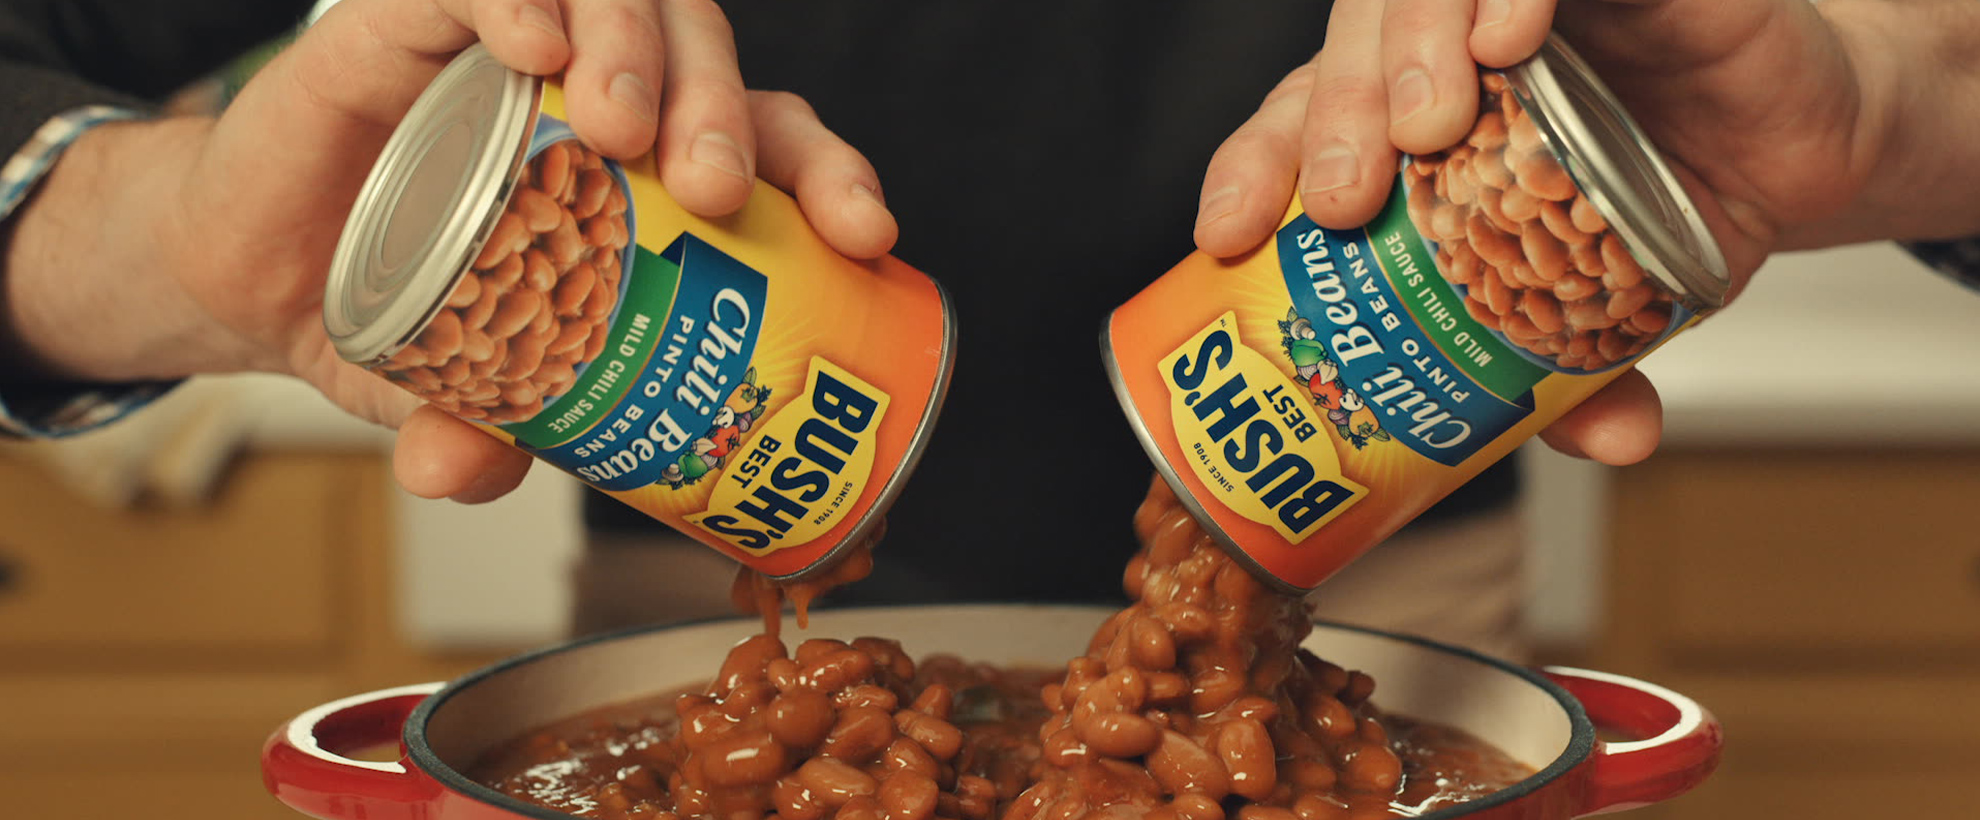 A man holds a can of Bushs beans in each hand, pouring them onto a plate